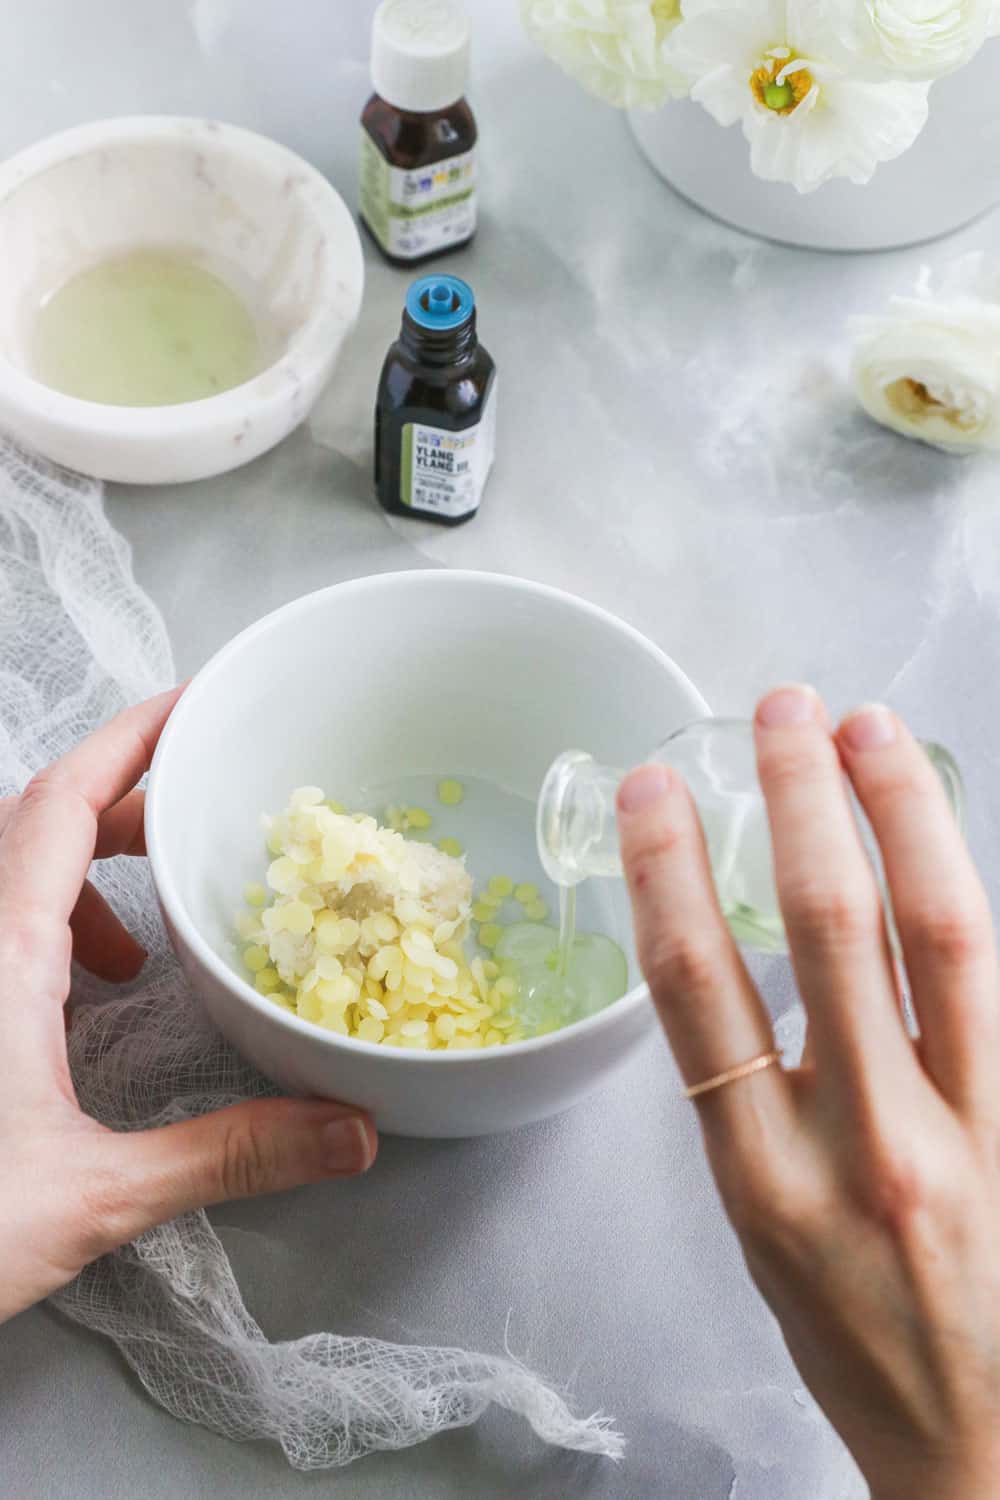 Melt cocoa butter and oils together for a soothing after sun balm